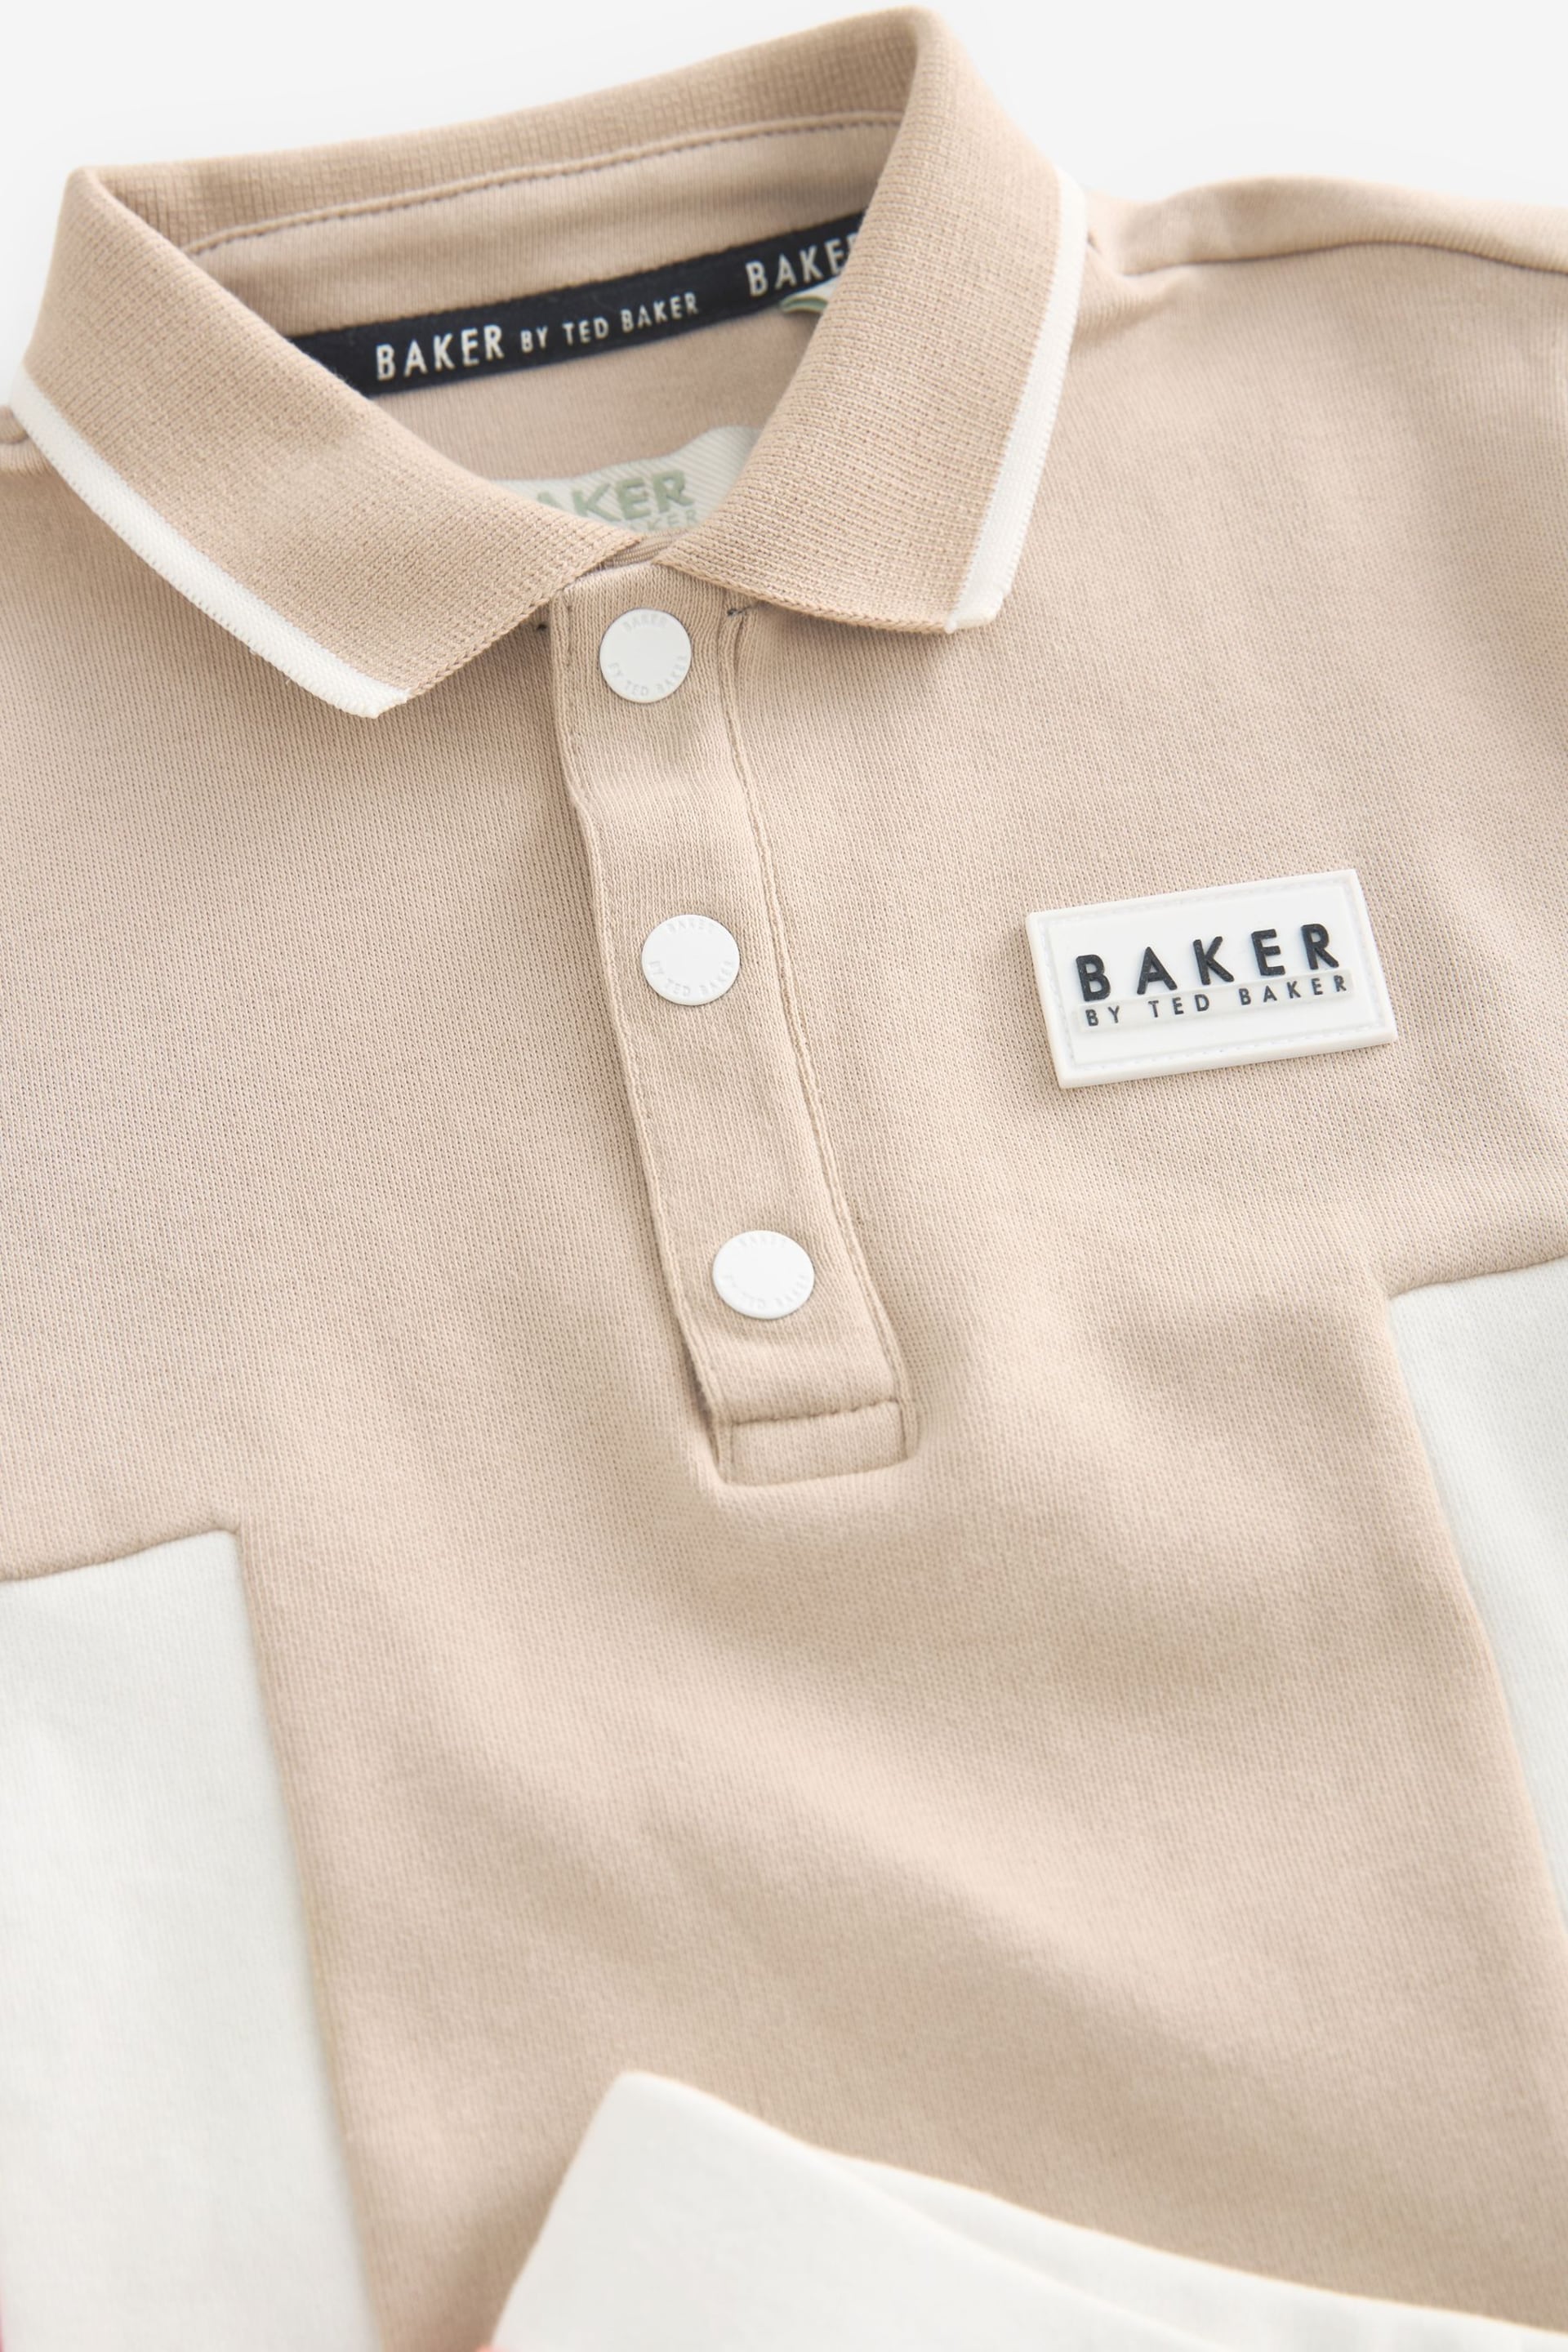 Baker by Ted Baker Colourblock Polo Shirt and Short Set - Image 10 of 11